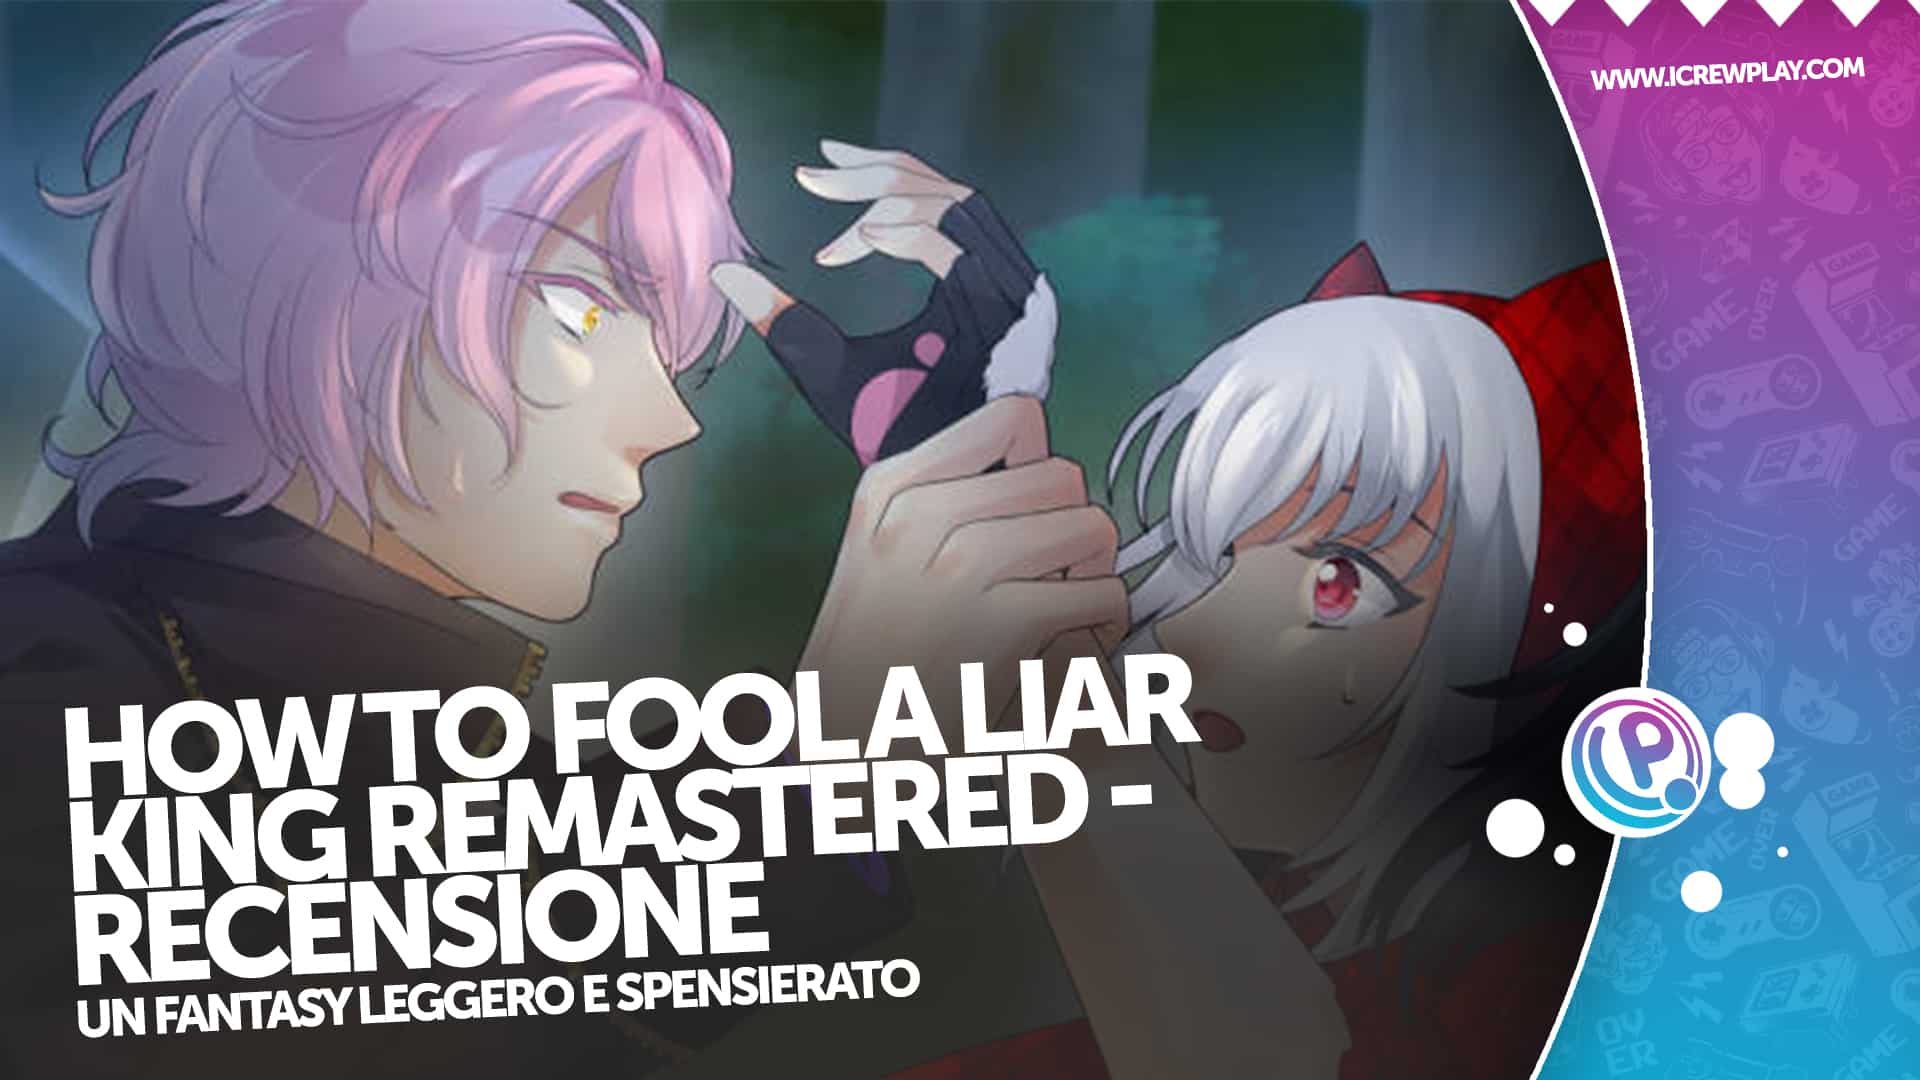 How to Fool a Liar King Remastered recensione